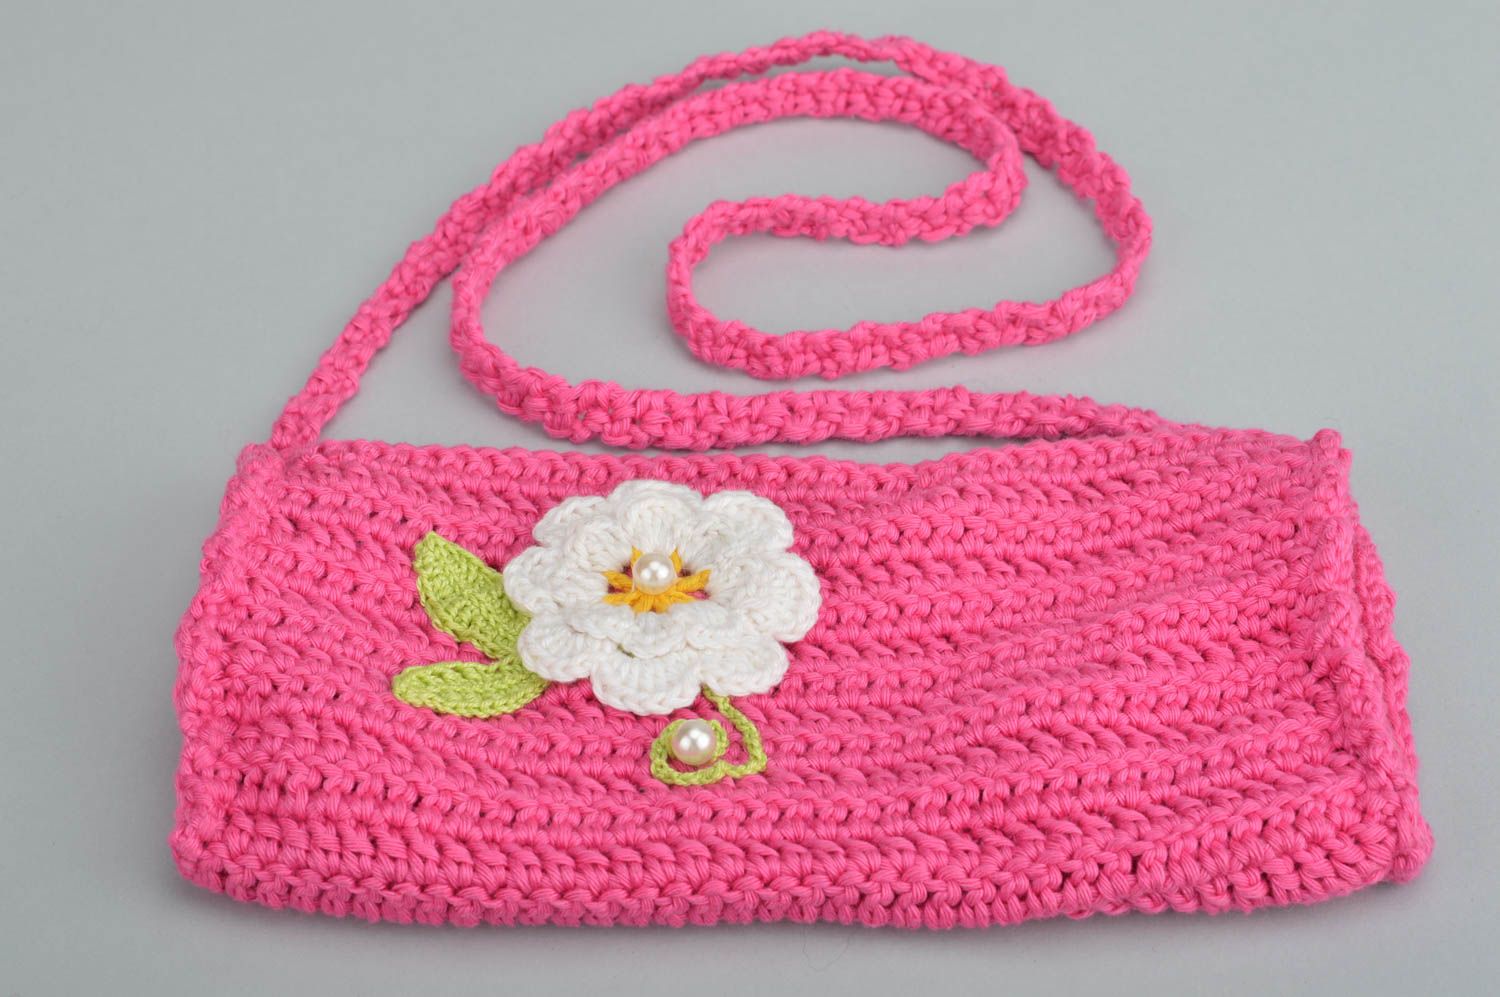 Pink beautiful handmade bag for kids woven of cotton threads with handles photo 2